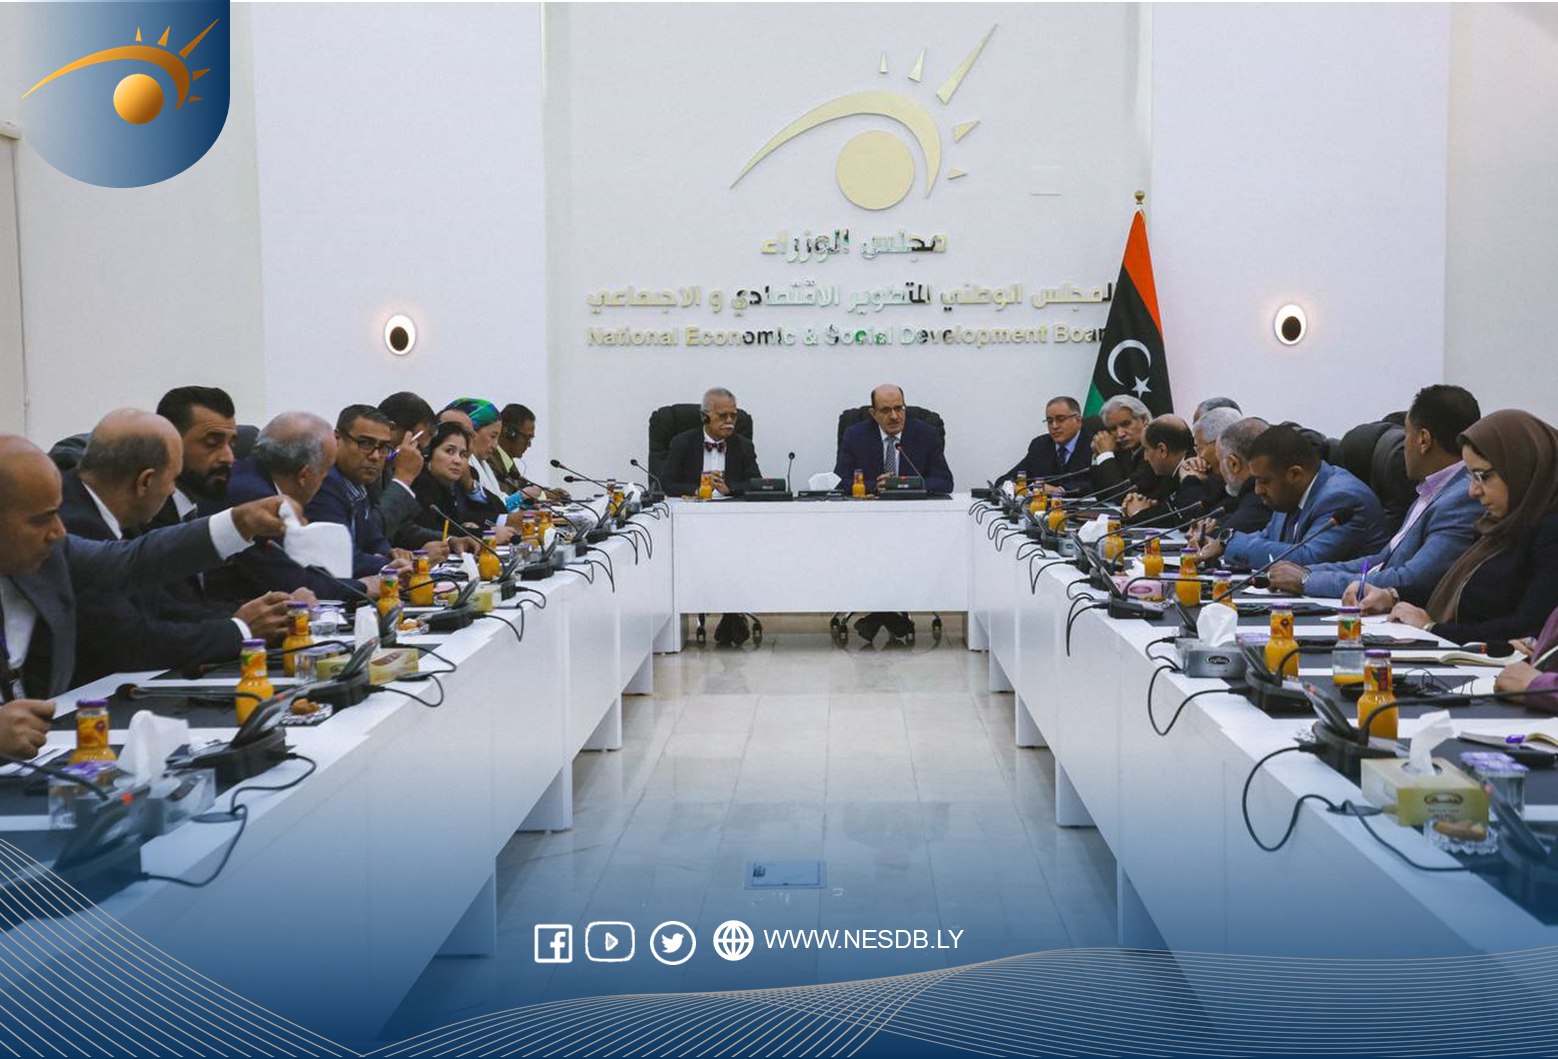 Libyan-Malaysian meetings series continues towards achieving a comprehensive national vision